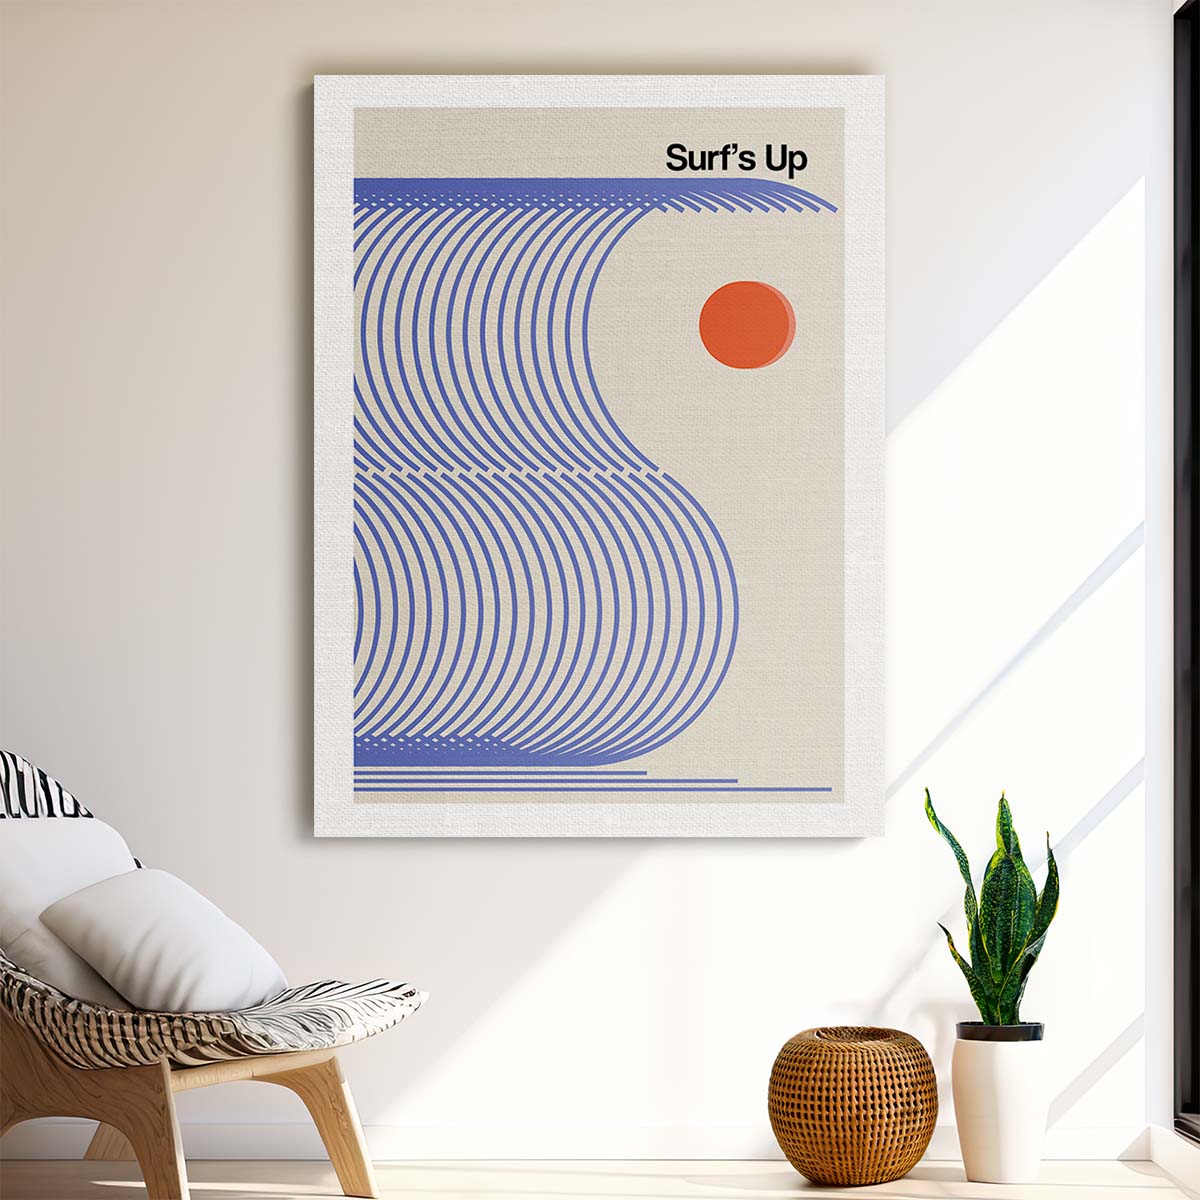 Surf's Up Typography Illustration Wall Art by Frances Collett by Luxuriance Designs, made in USA